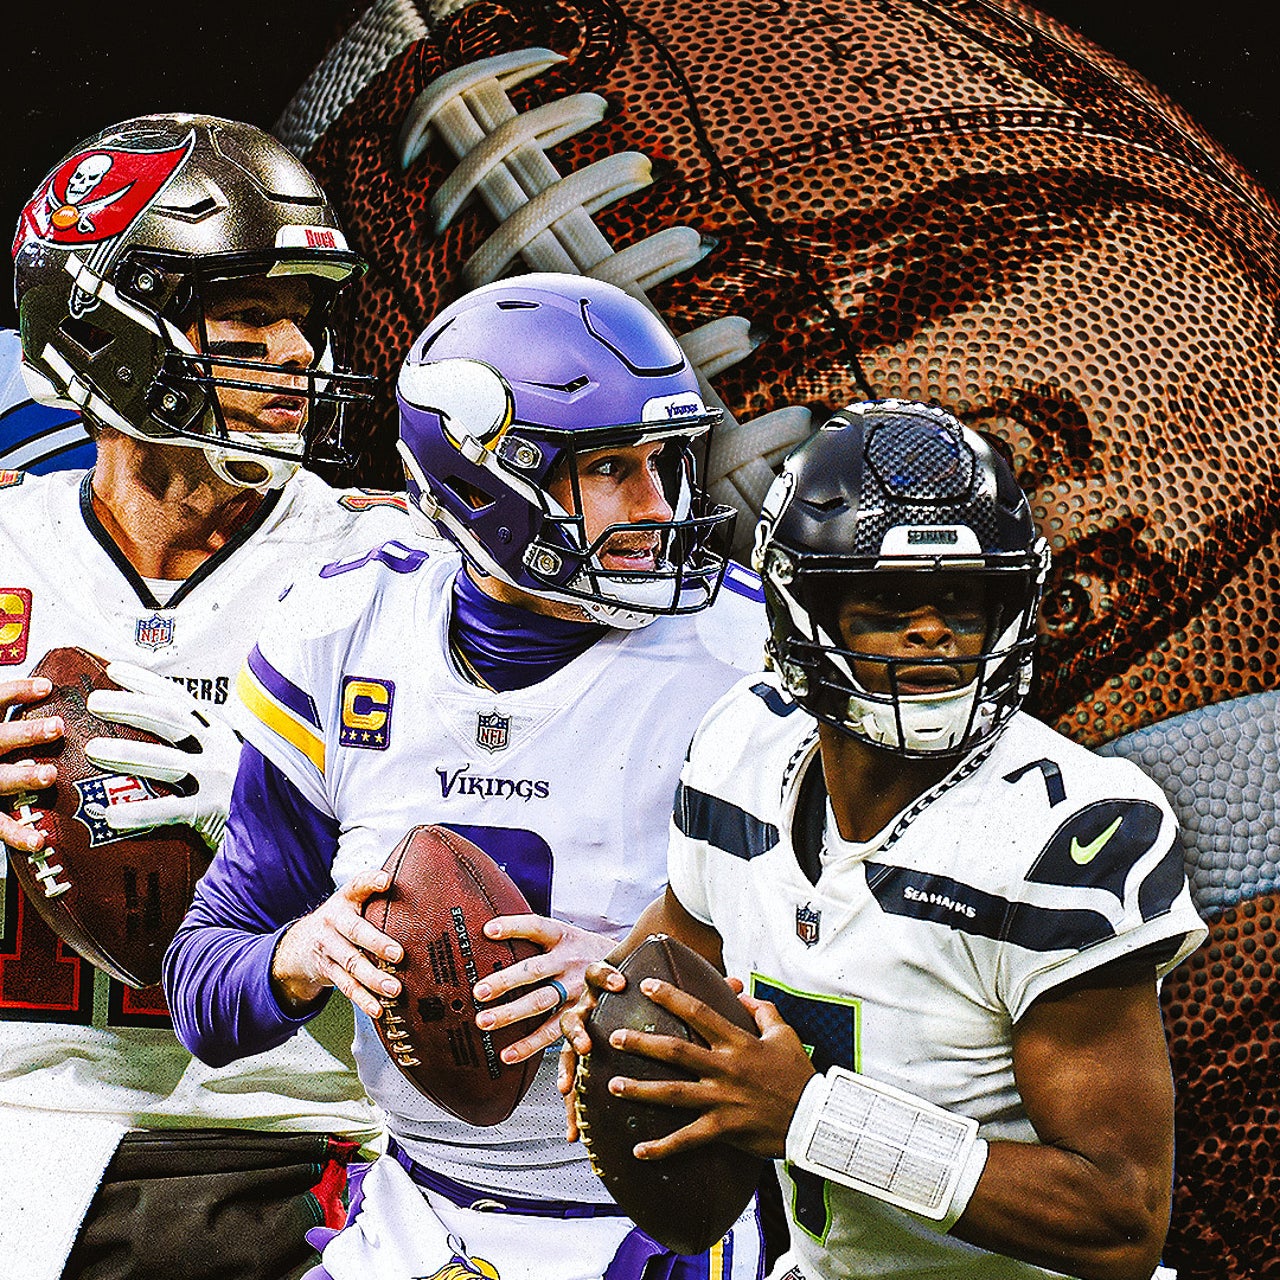 NFL Playoffs preview: A weekend of underdogs and